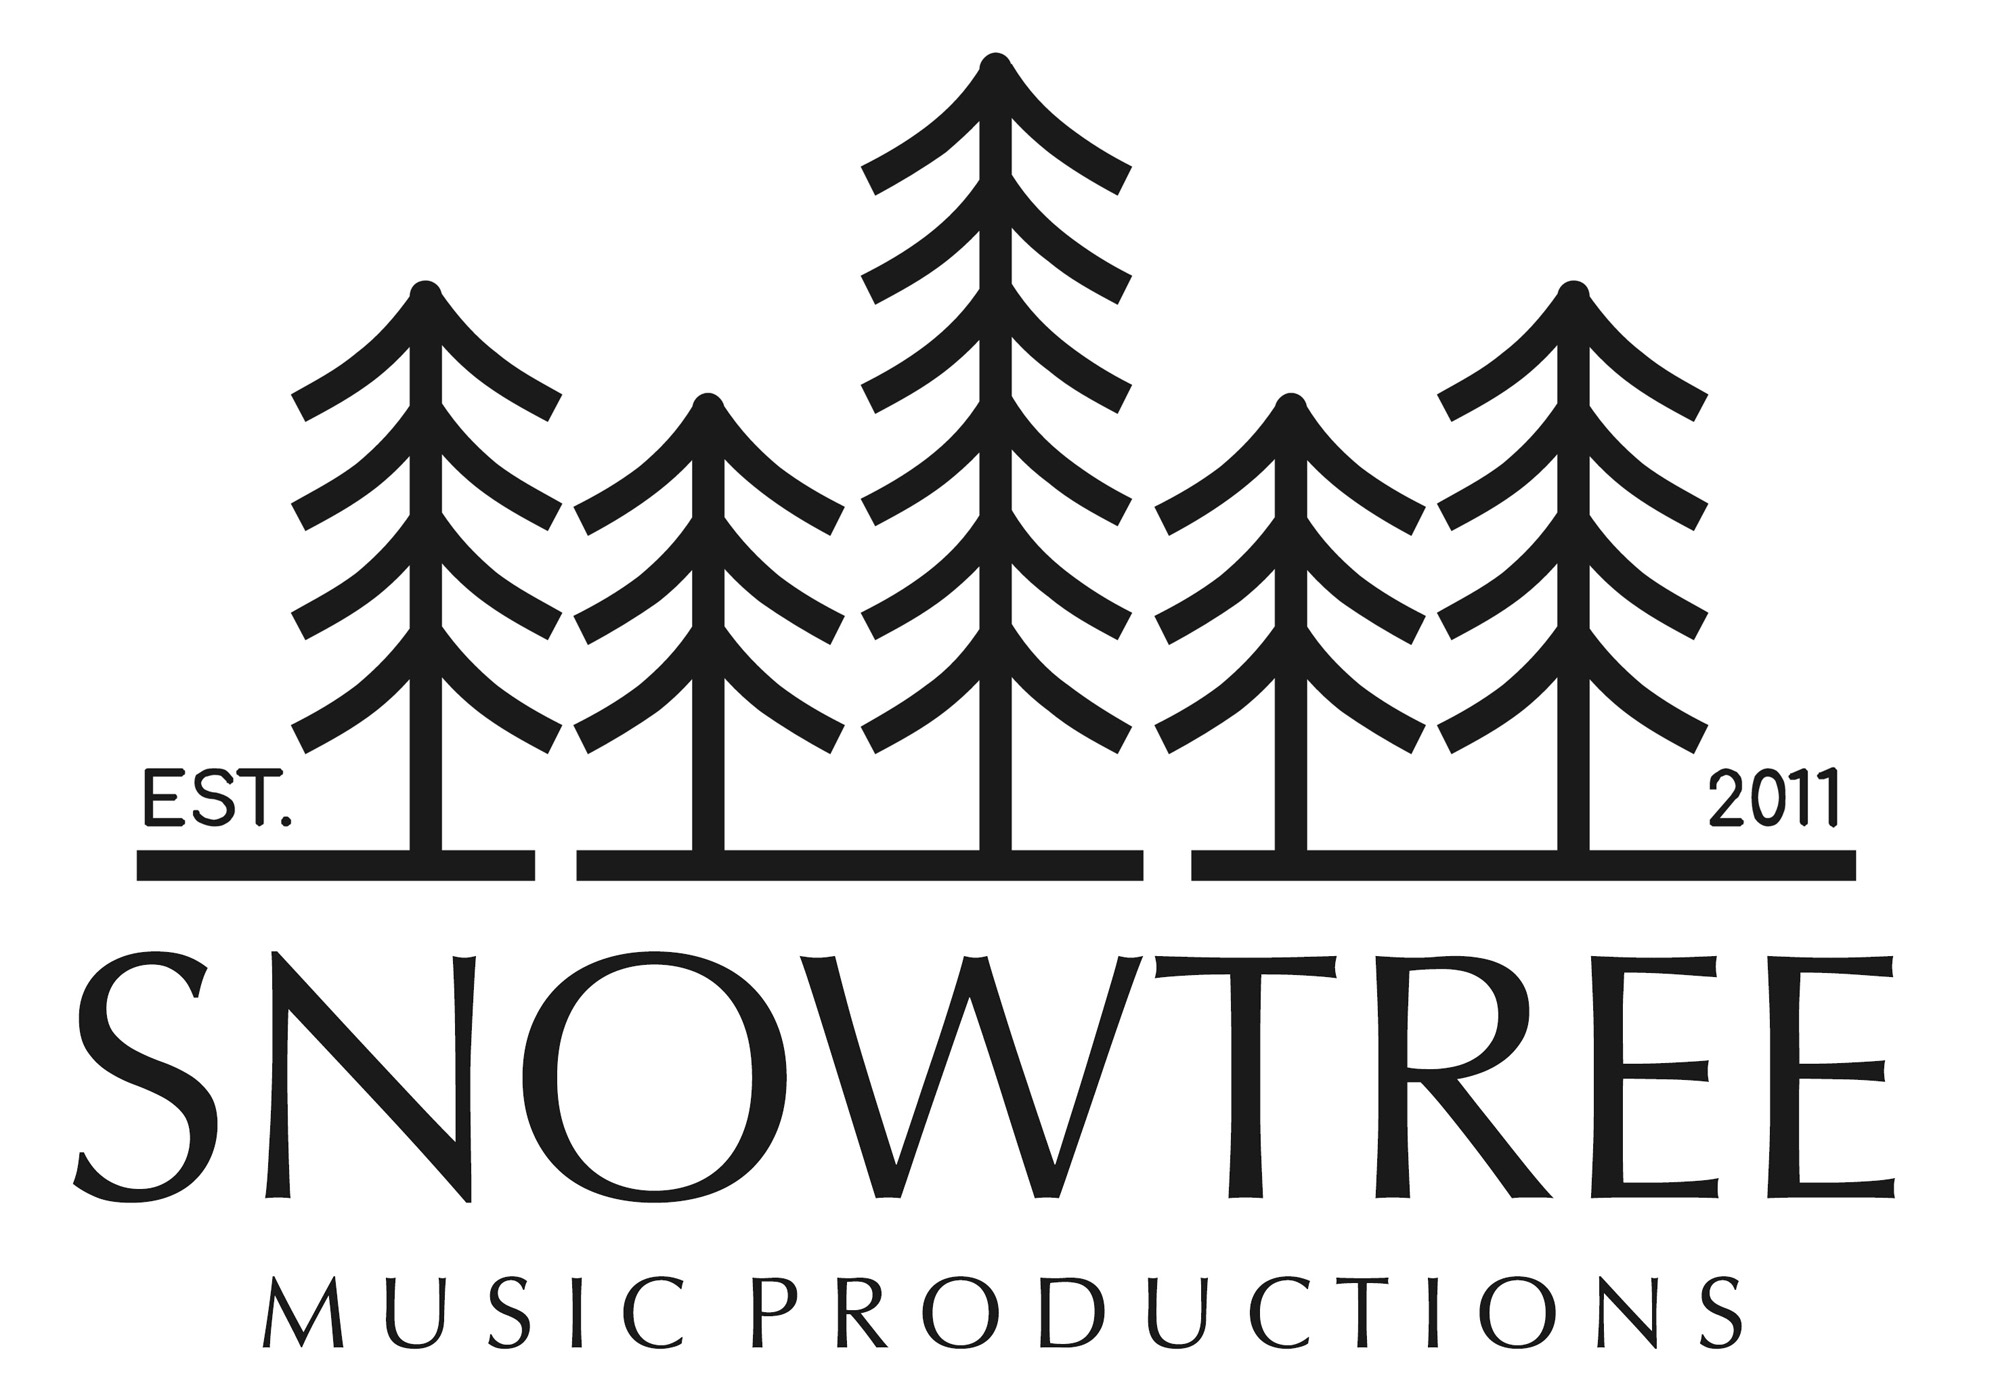 SnowTree Productions